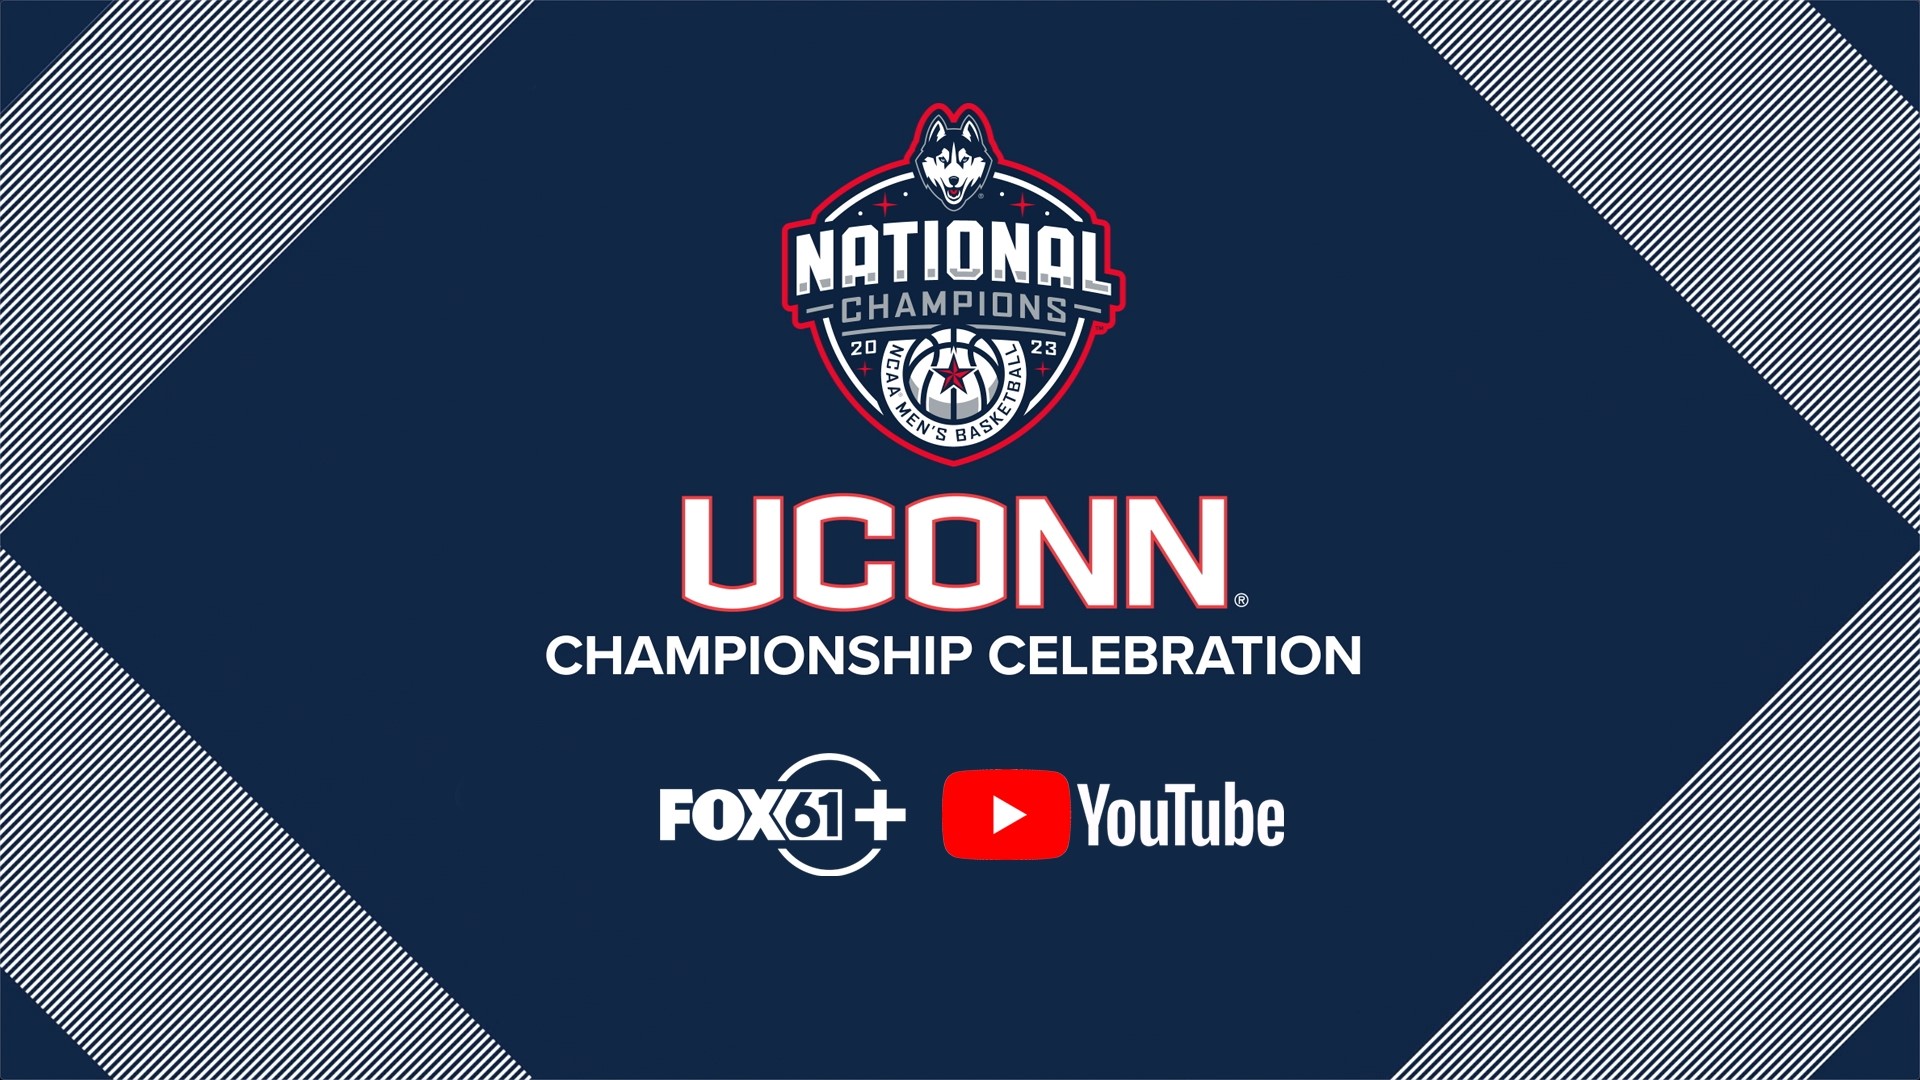 The UConn men's basketball team celebrated after winning the NCAA Div. 1 Championship.